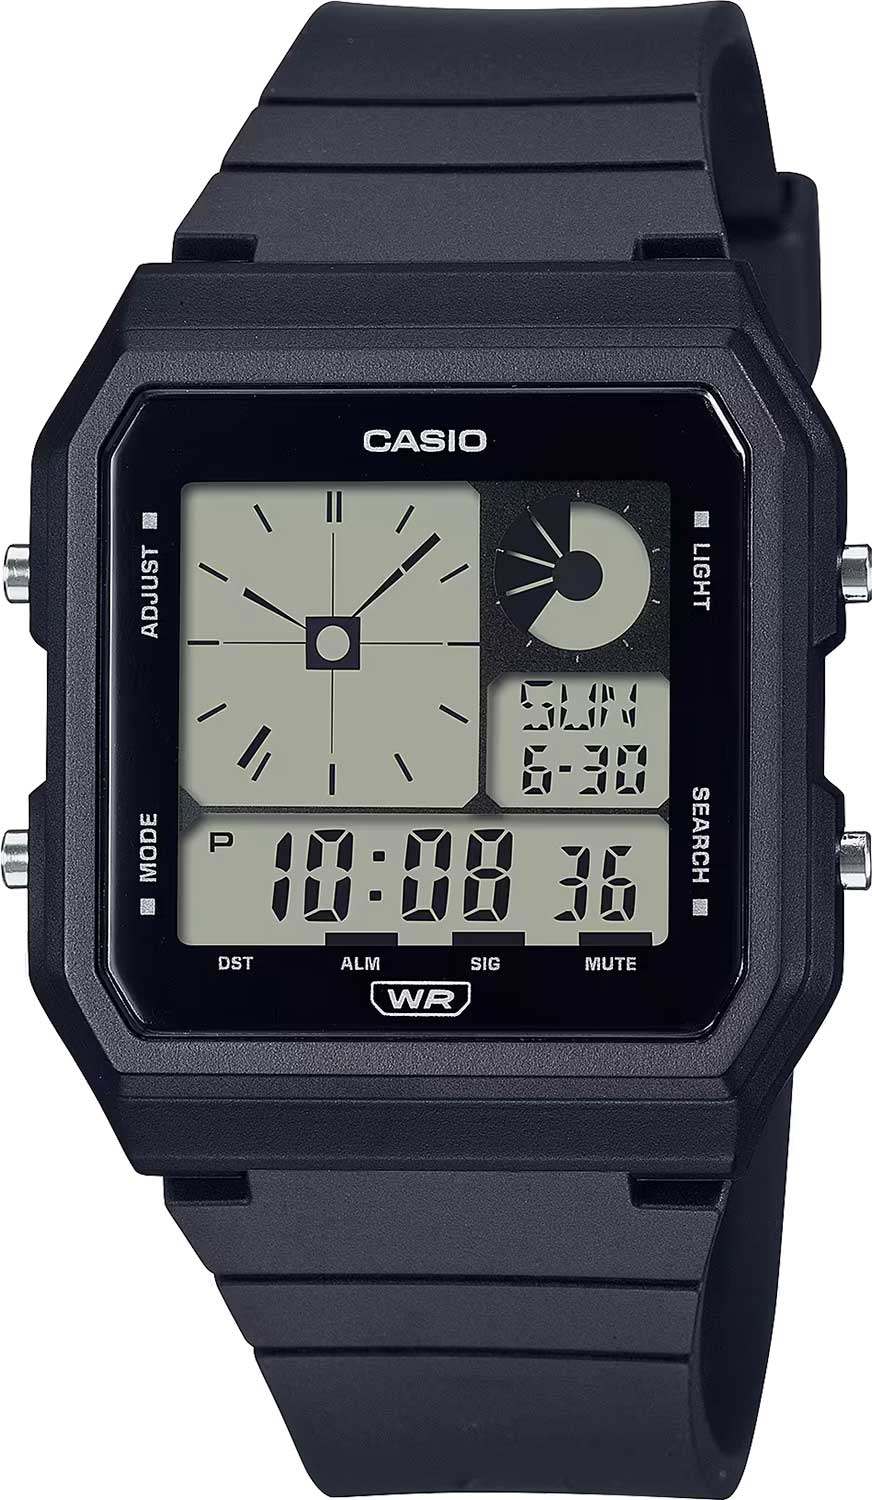    Casio Collection LF-20W-1A  